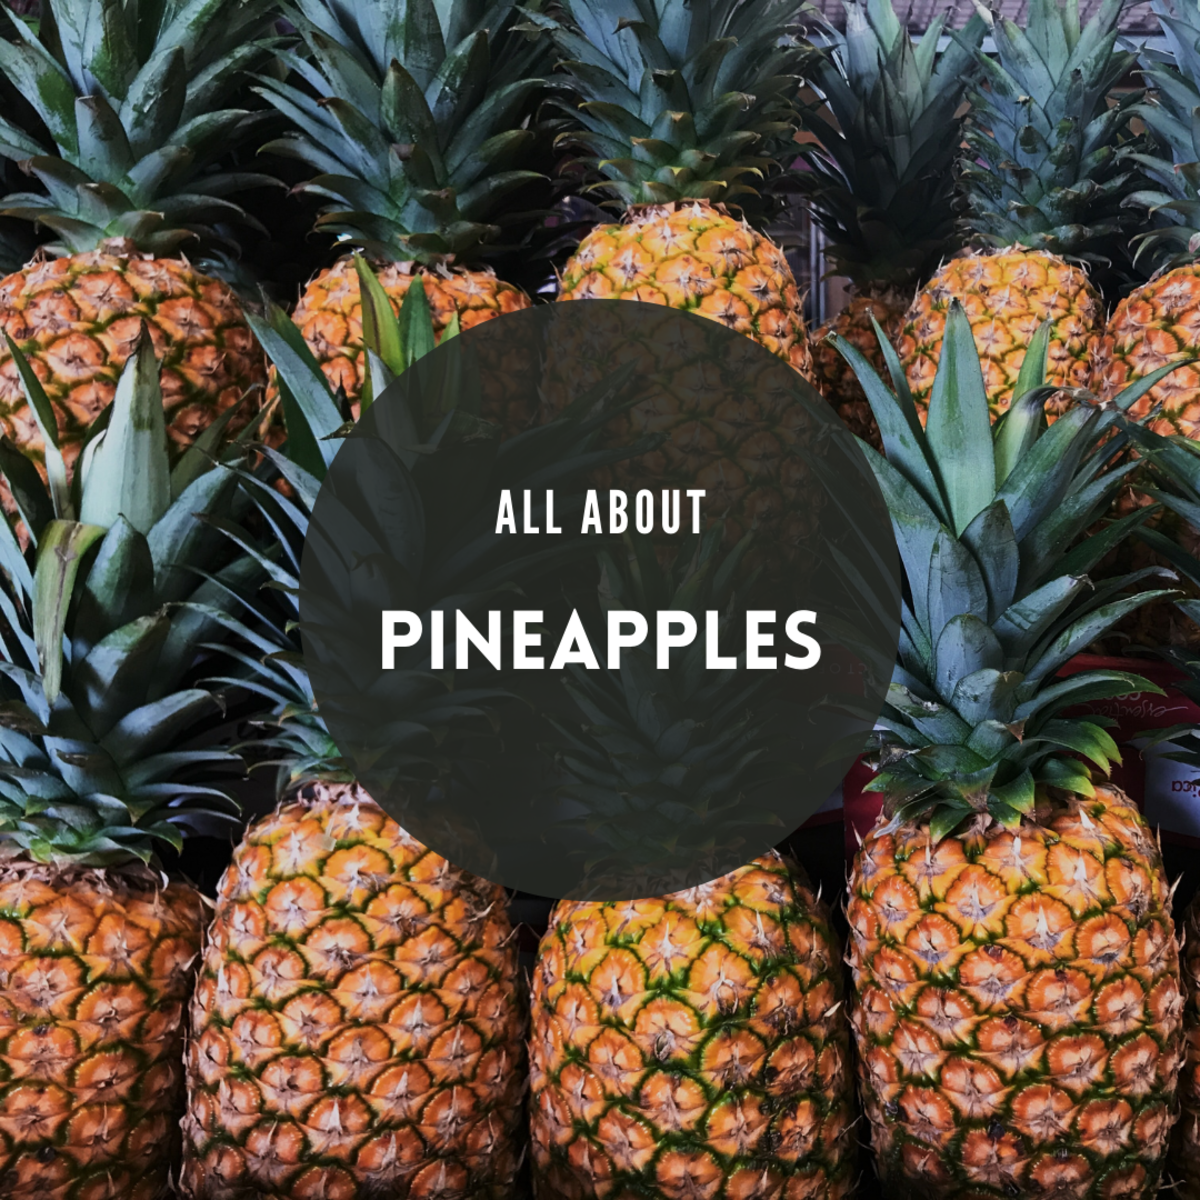 Top 5 Different Types of Pineapple (Plus Cut/Style Guide)